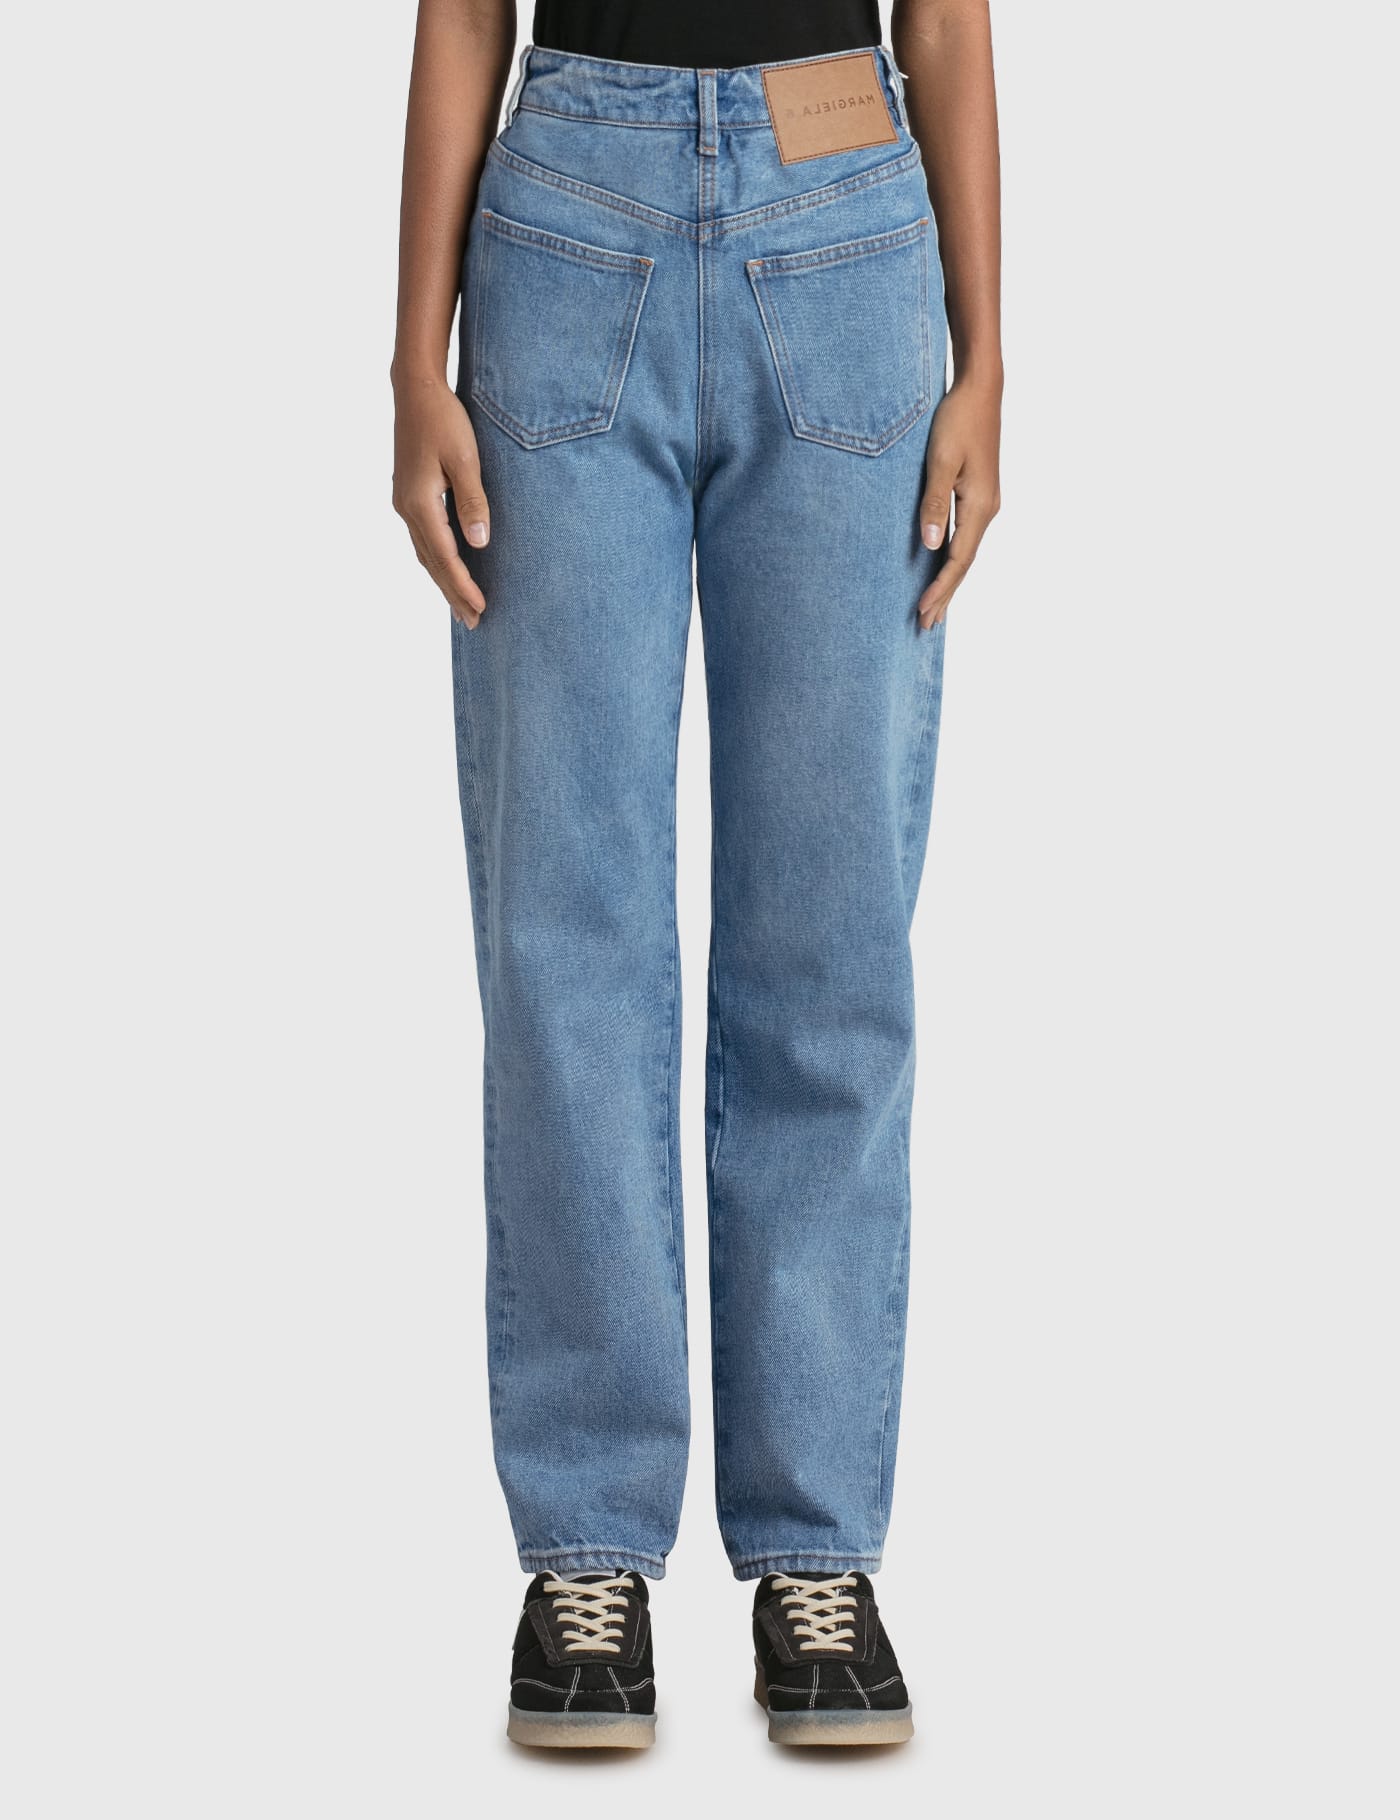 MM6 Maison Margiela☆ Blue Baggy Jeans ワイドレッグジーンズ - ボトムス